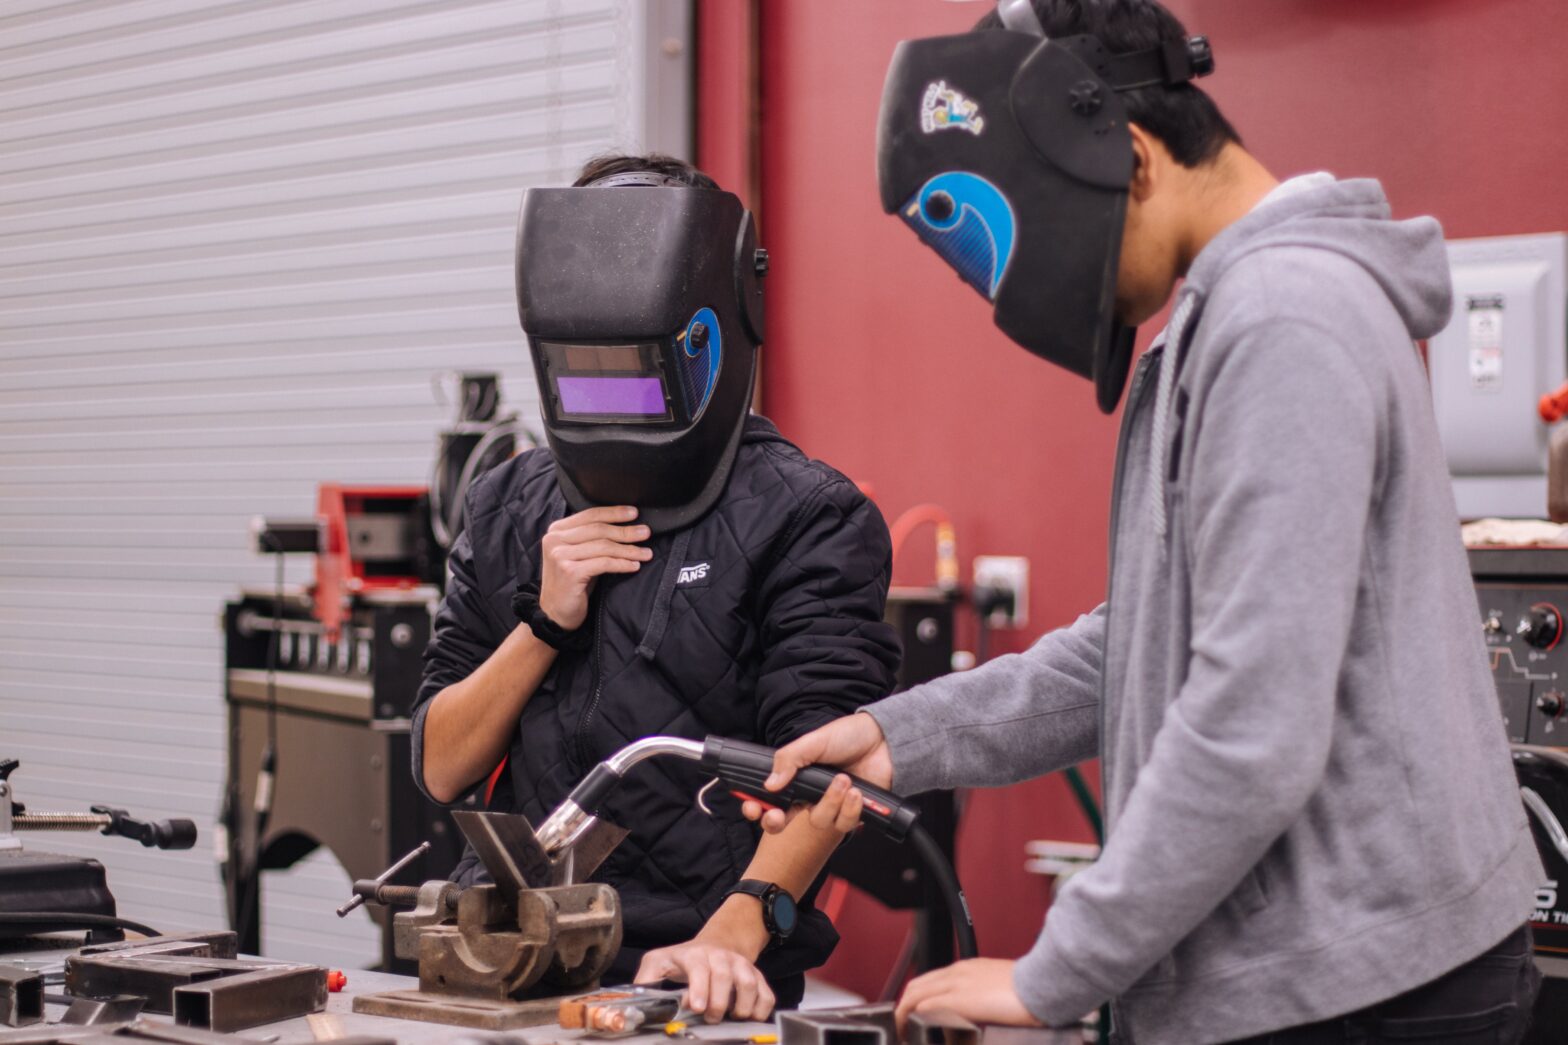 A photograph of two people in a workshop, using welding equipment to weld materials. They are both wearing helmets and the correct welding PPE.